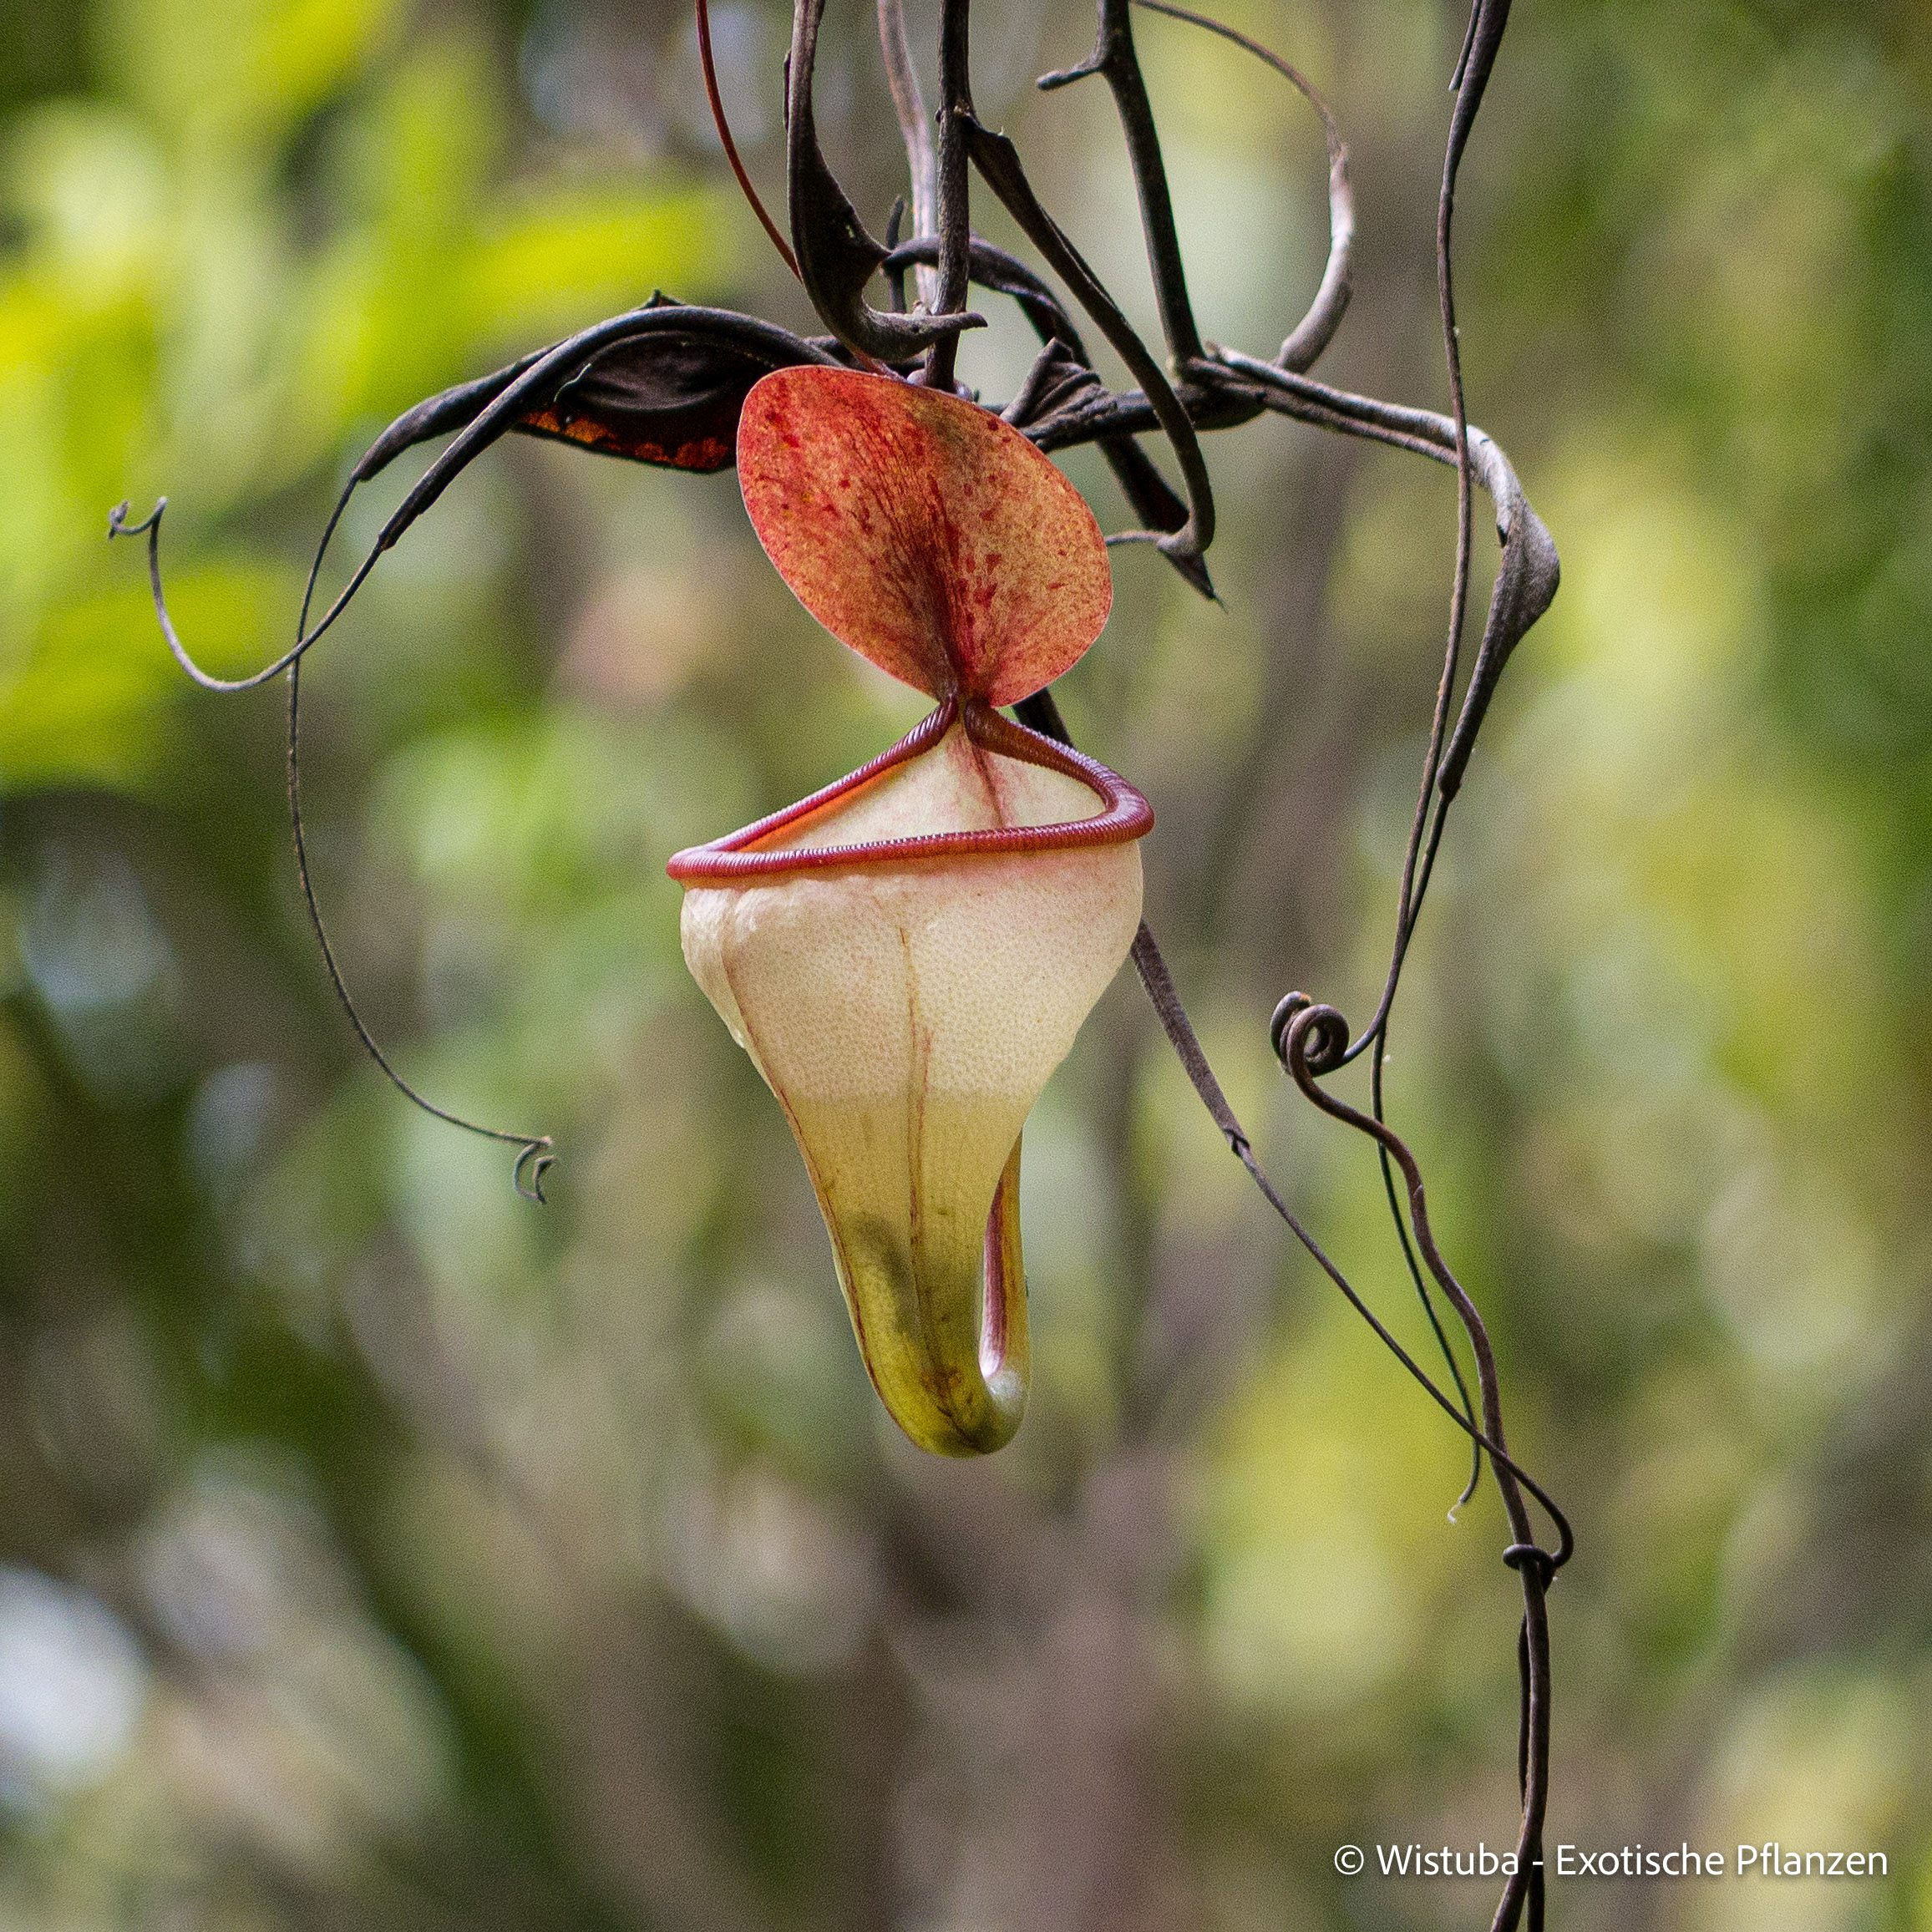 Nepenthes pitopangii ("Ivory Colored Form")